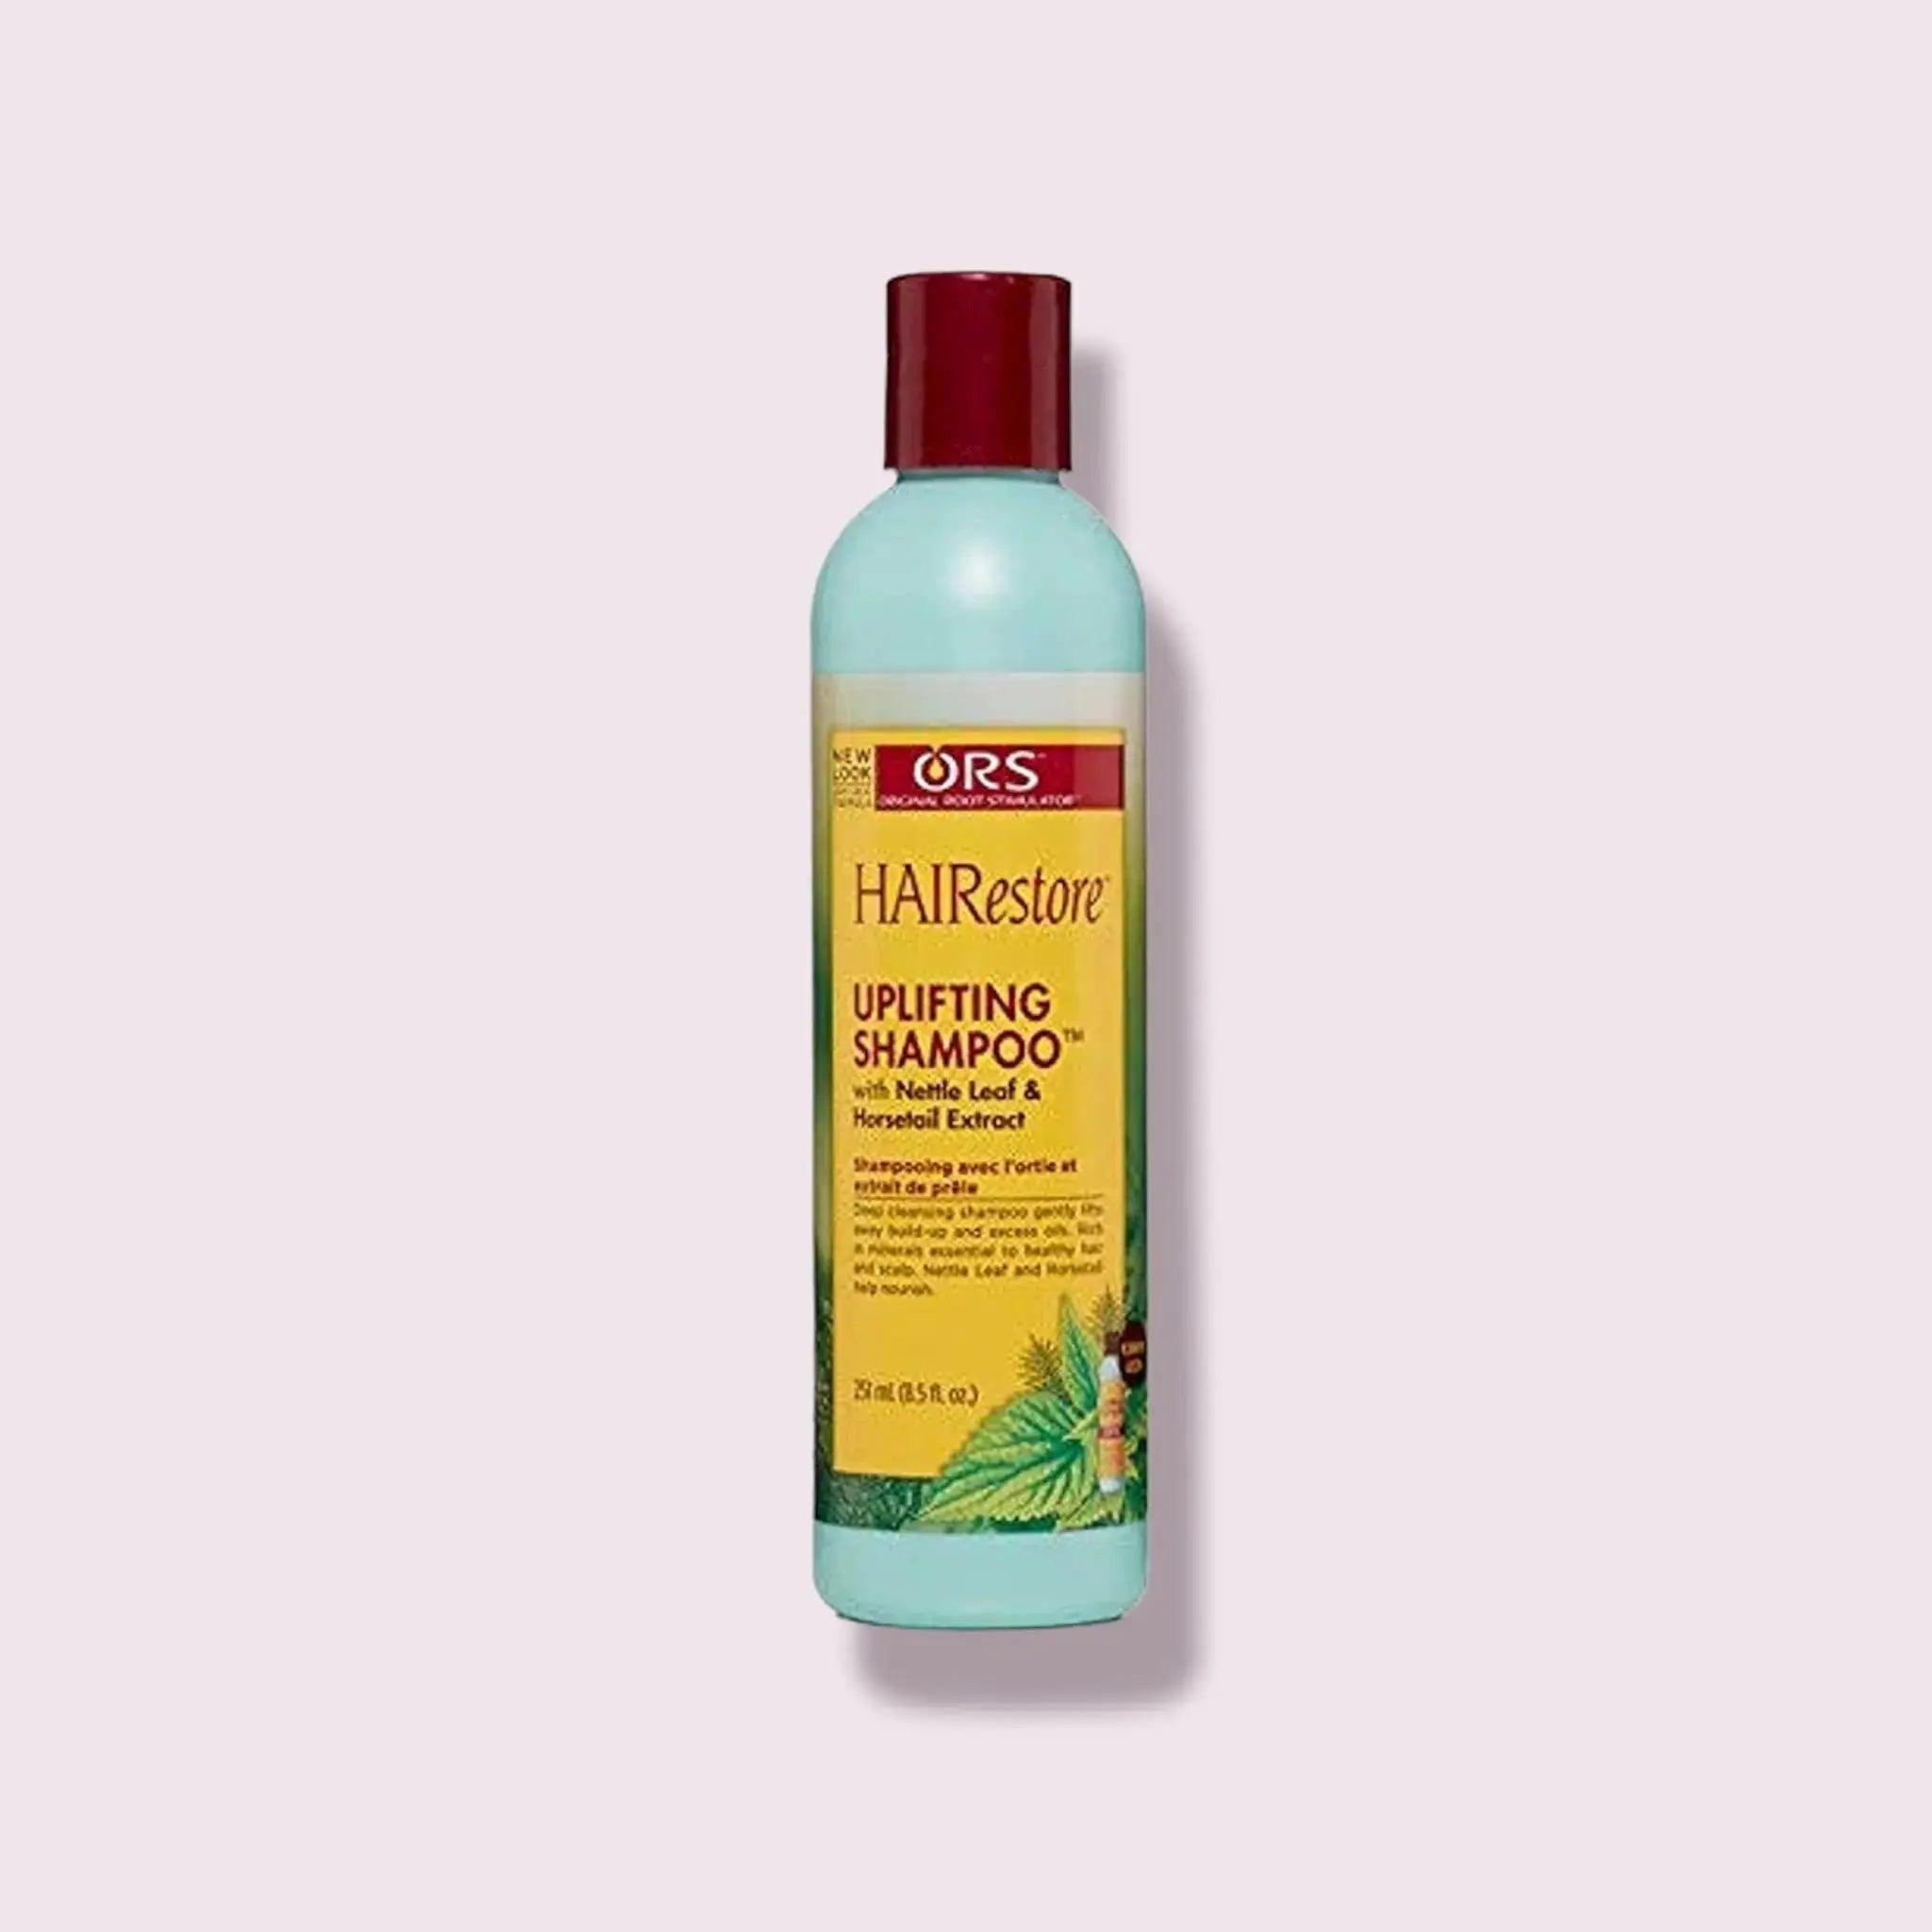 ORS HAIRestore Uplifting Shampoo with Nettle Leaf and Horsetail Extract - Honesty Sales U.K